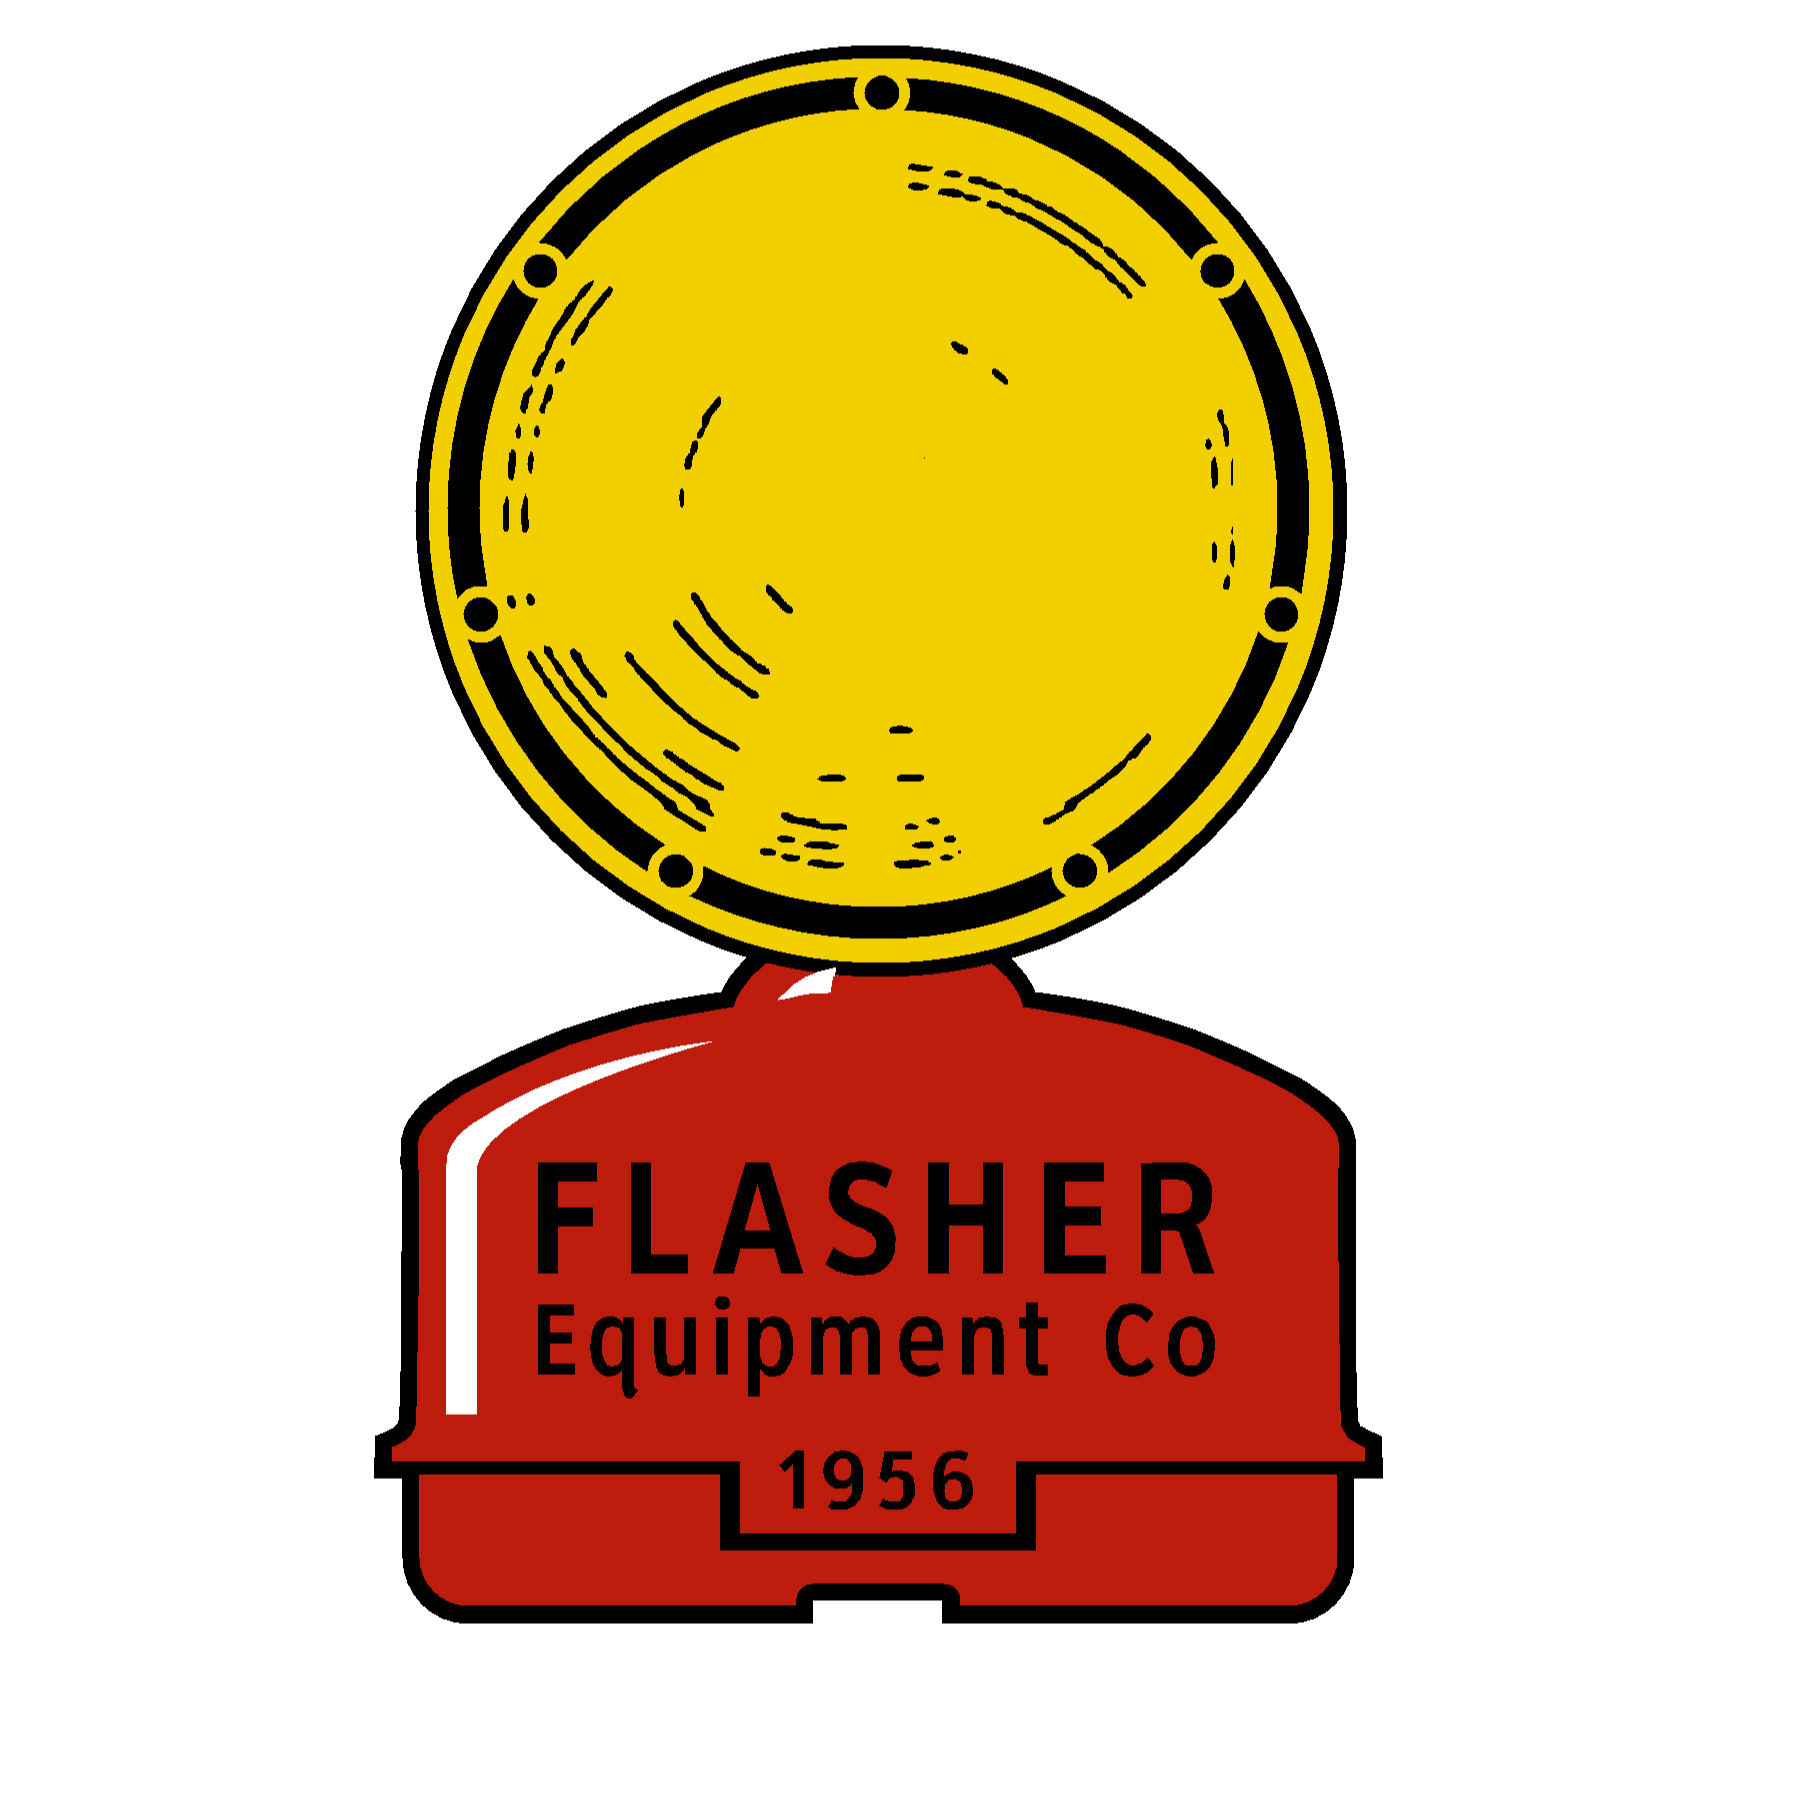 Business logo of Flasher Equipment Co